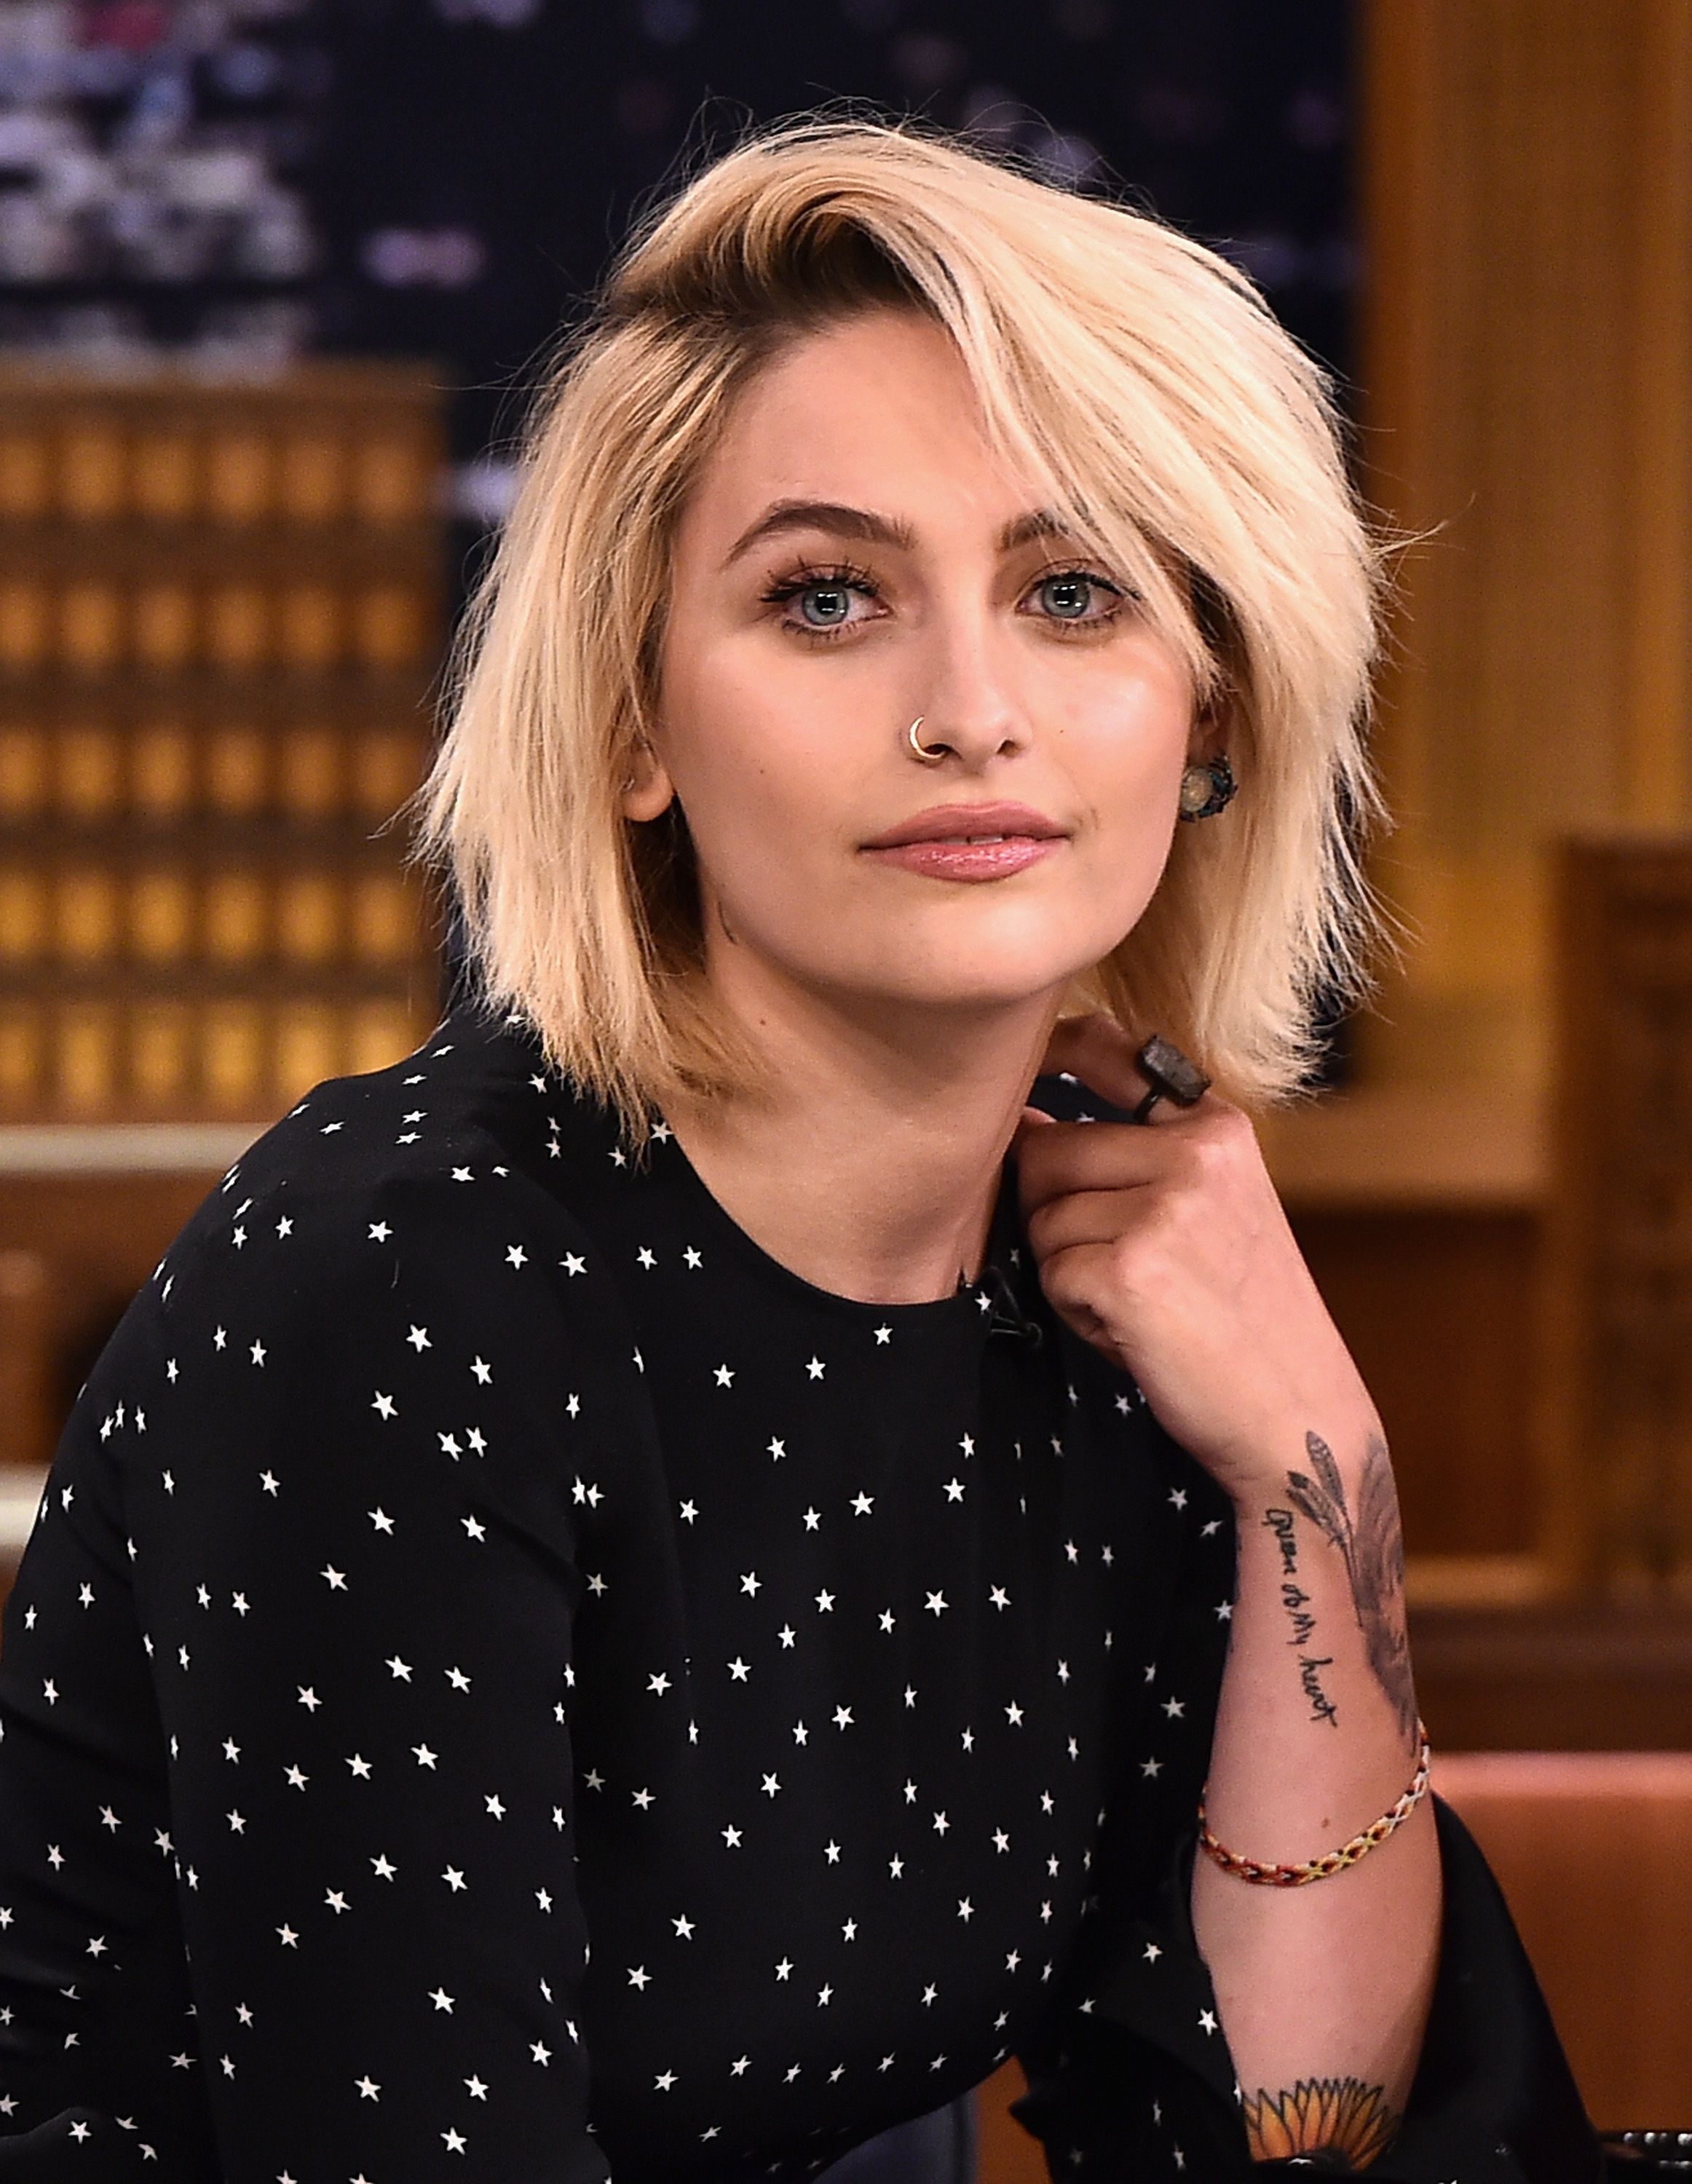 Paris Jackson during "The Tonight Show Starring Jimmy Fallon" at Rockefeller Center on March 20, 2017 in New York City. | Source: Getty Images